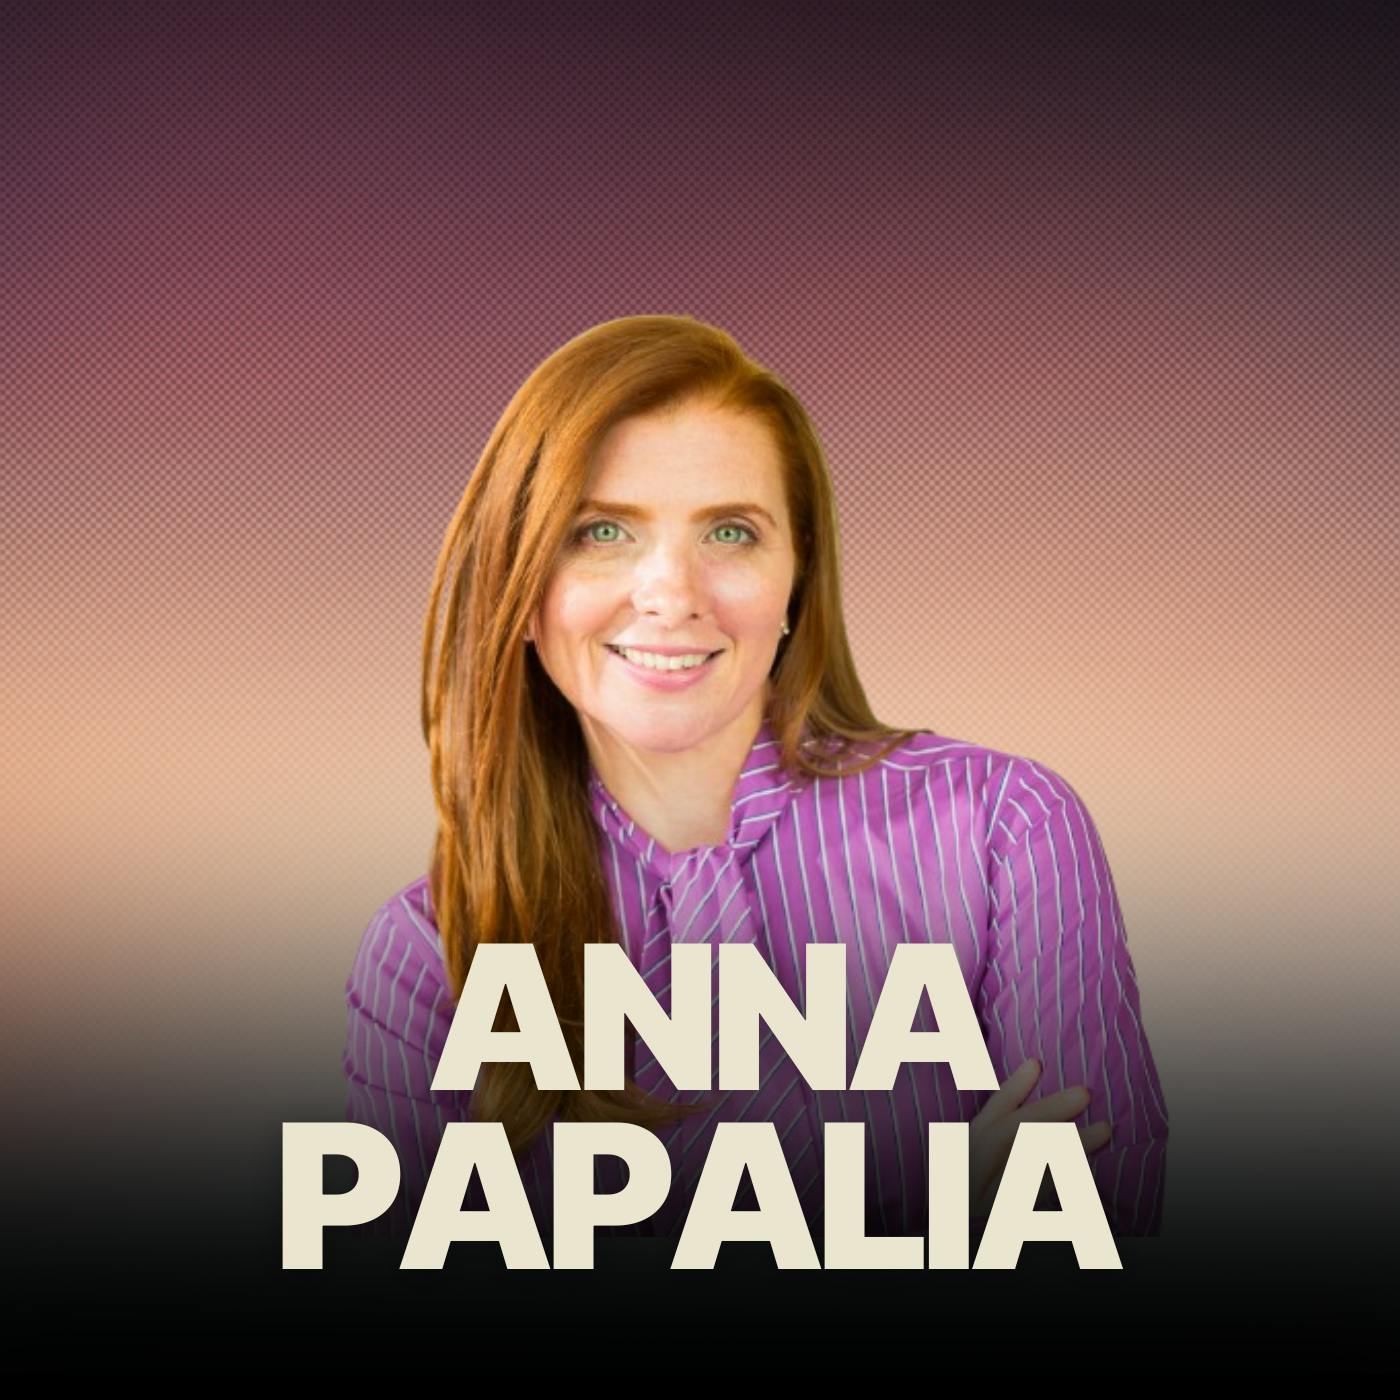 Anna Papalia | How To Nail Any Interview & Sell Yourself By Being Fully You